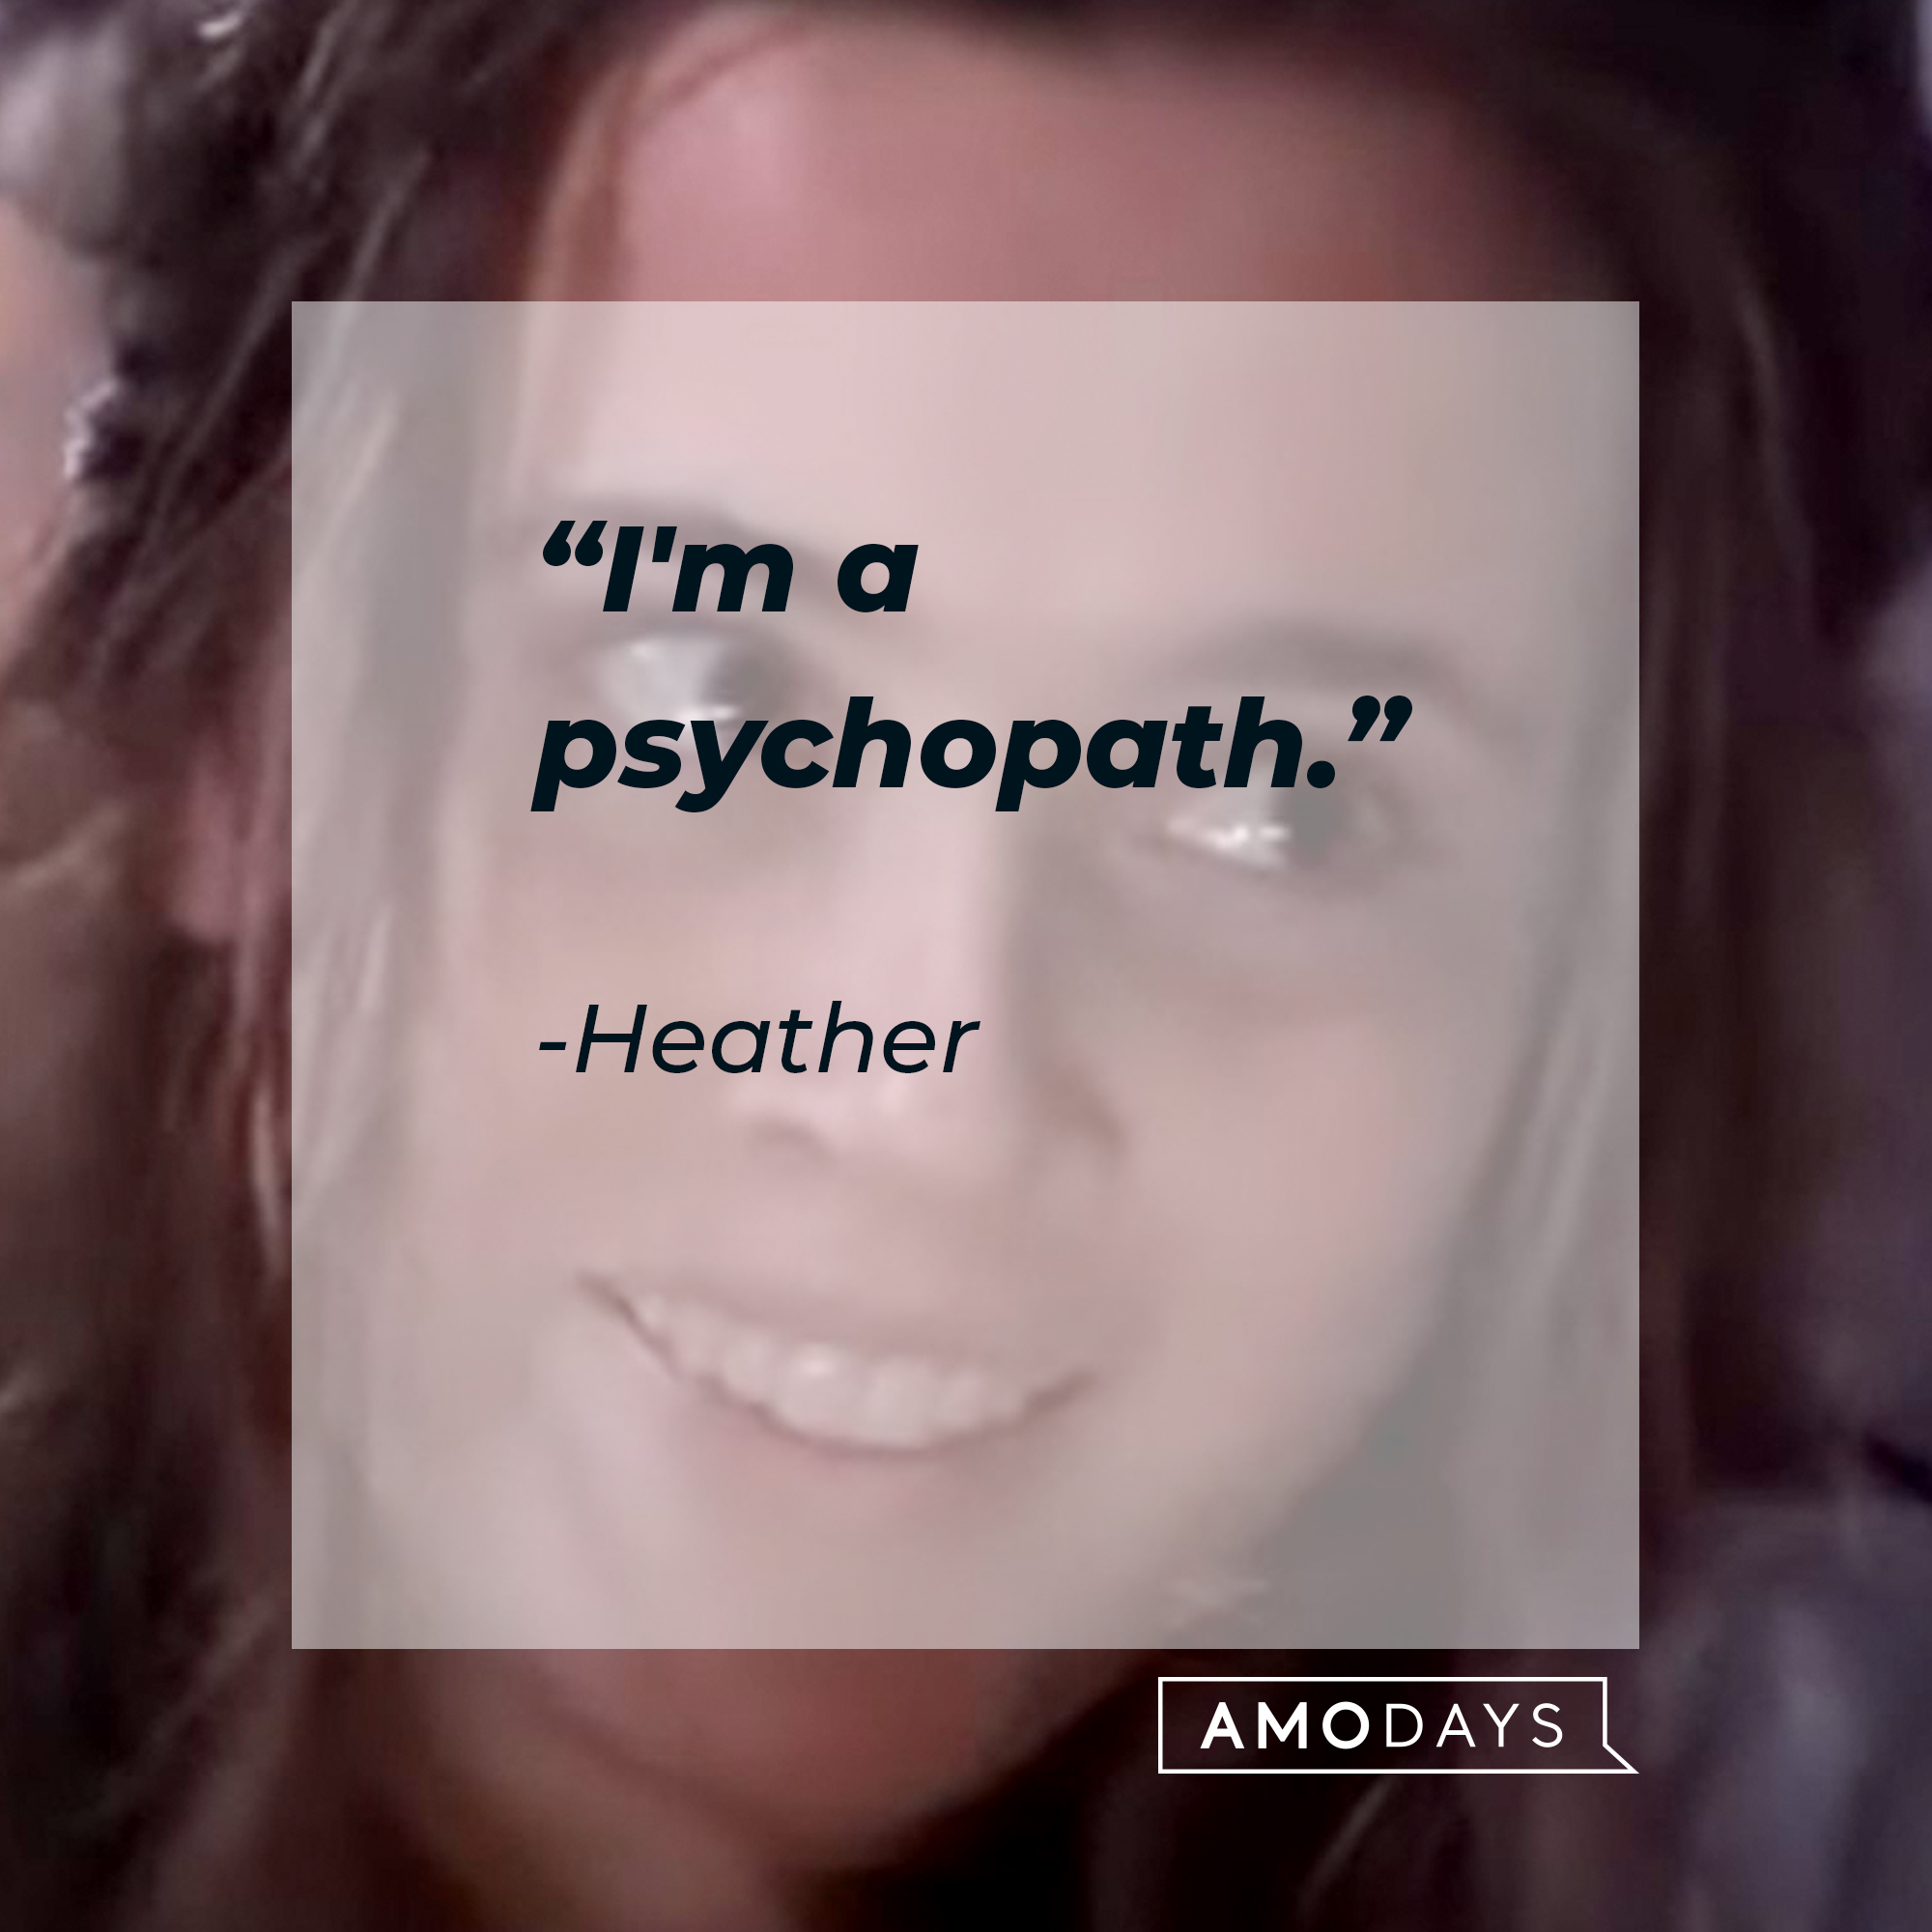 An image of Heather with her quote: “I'm a psychopath.” | Source: AmoDays